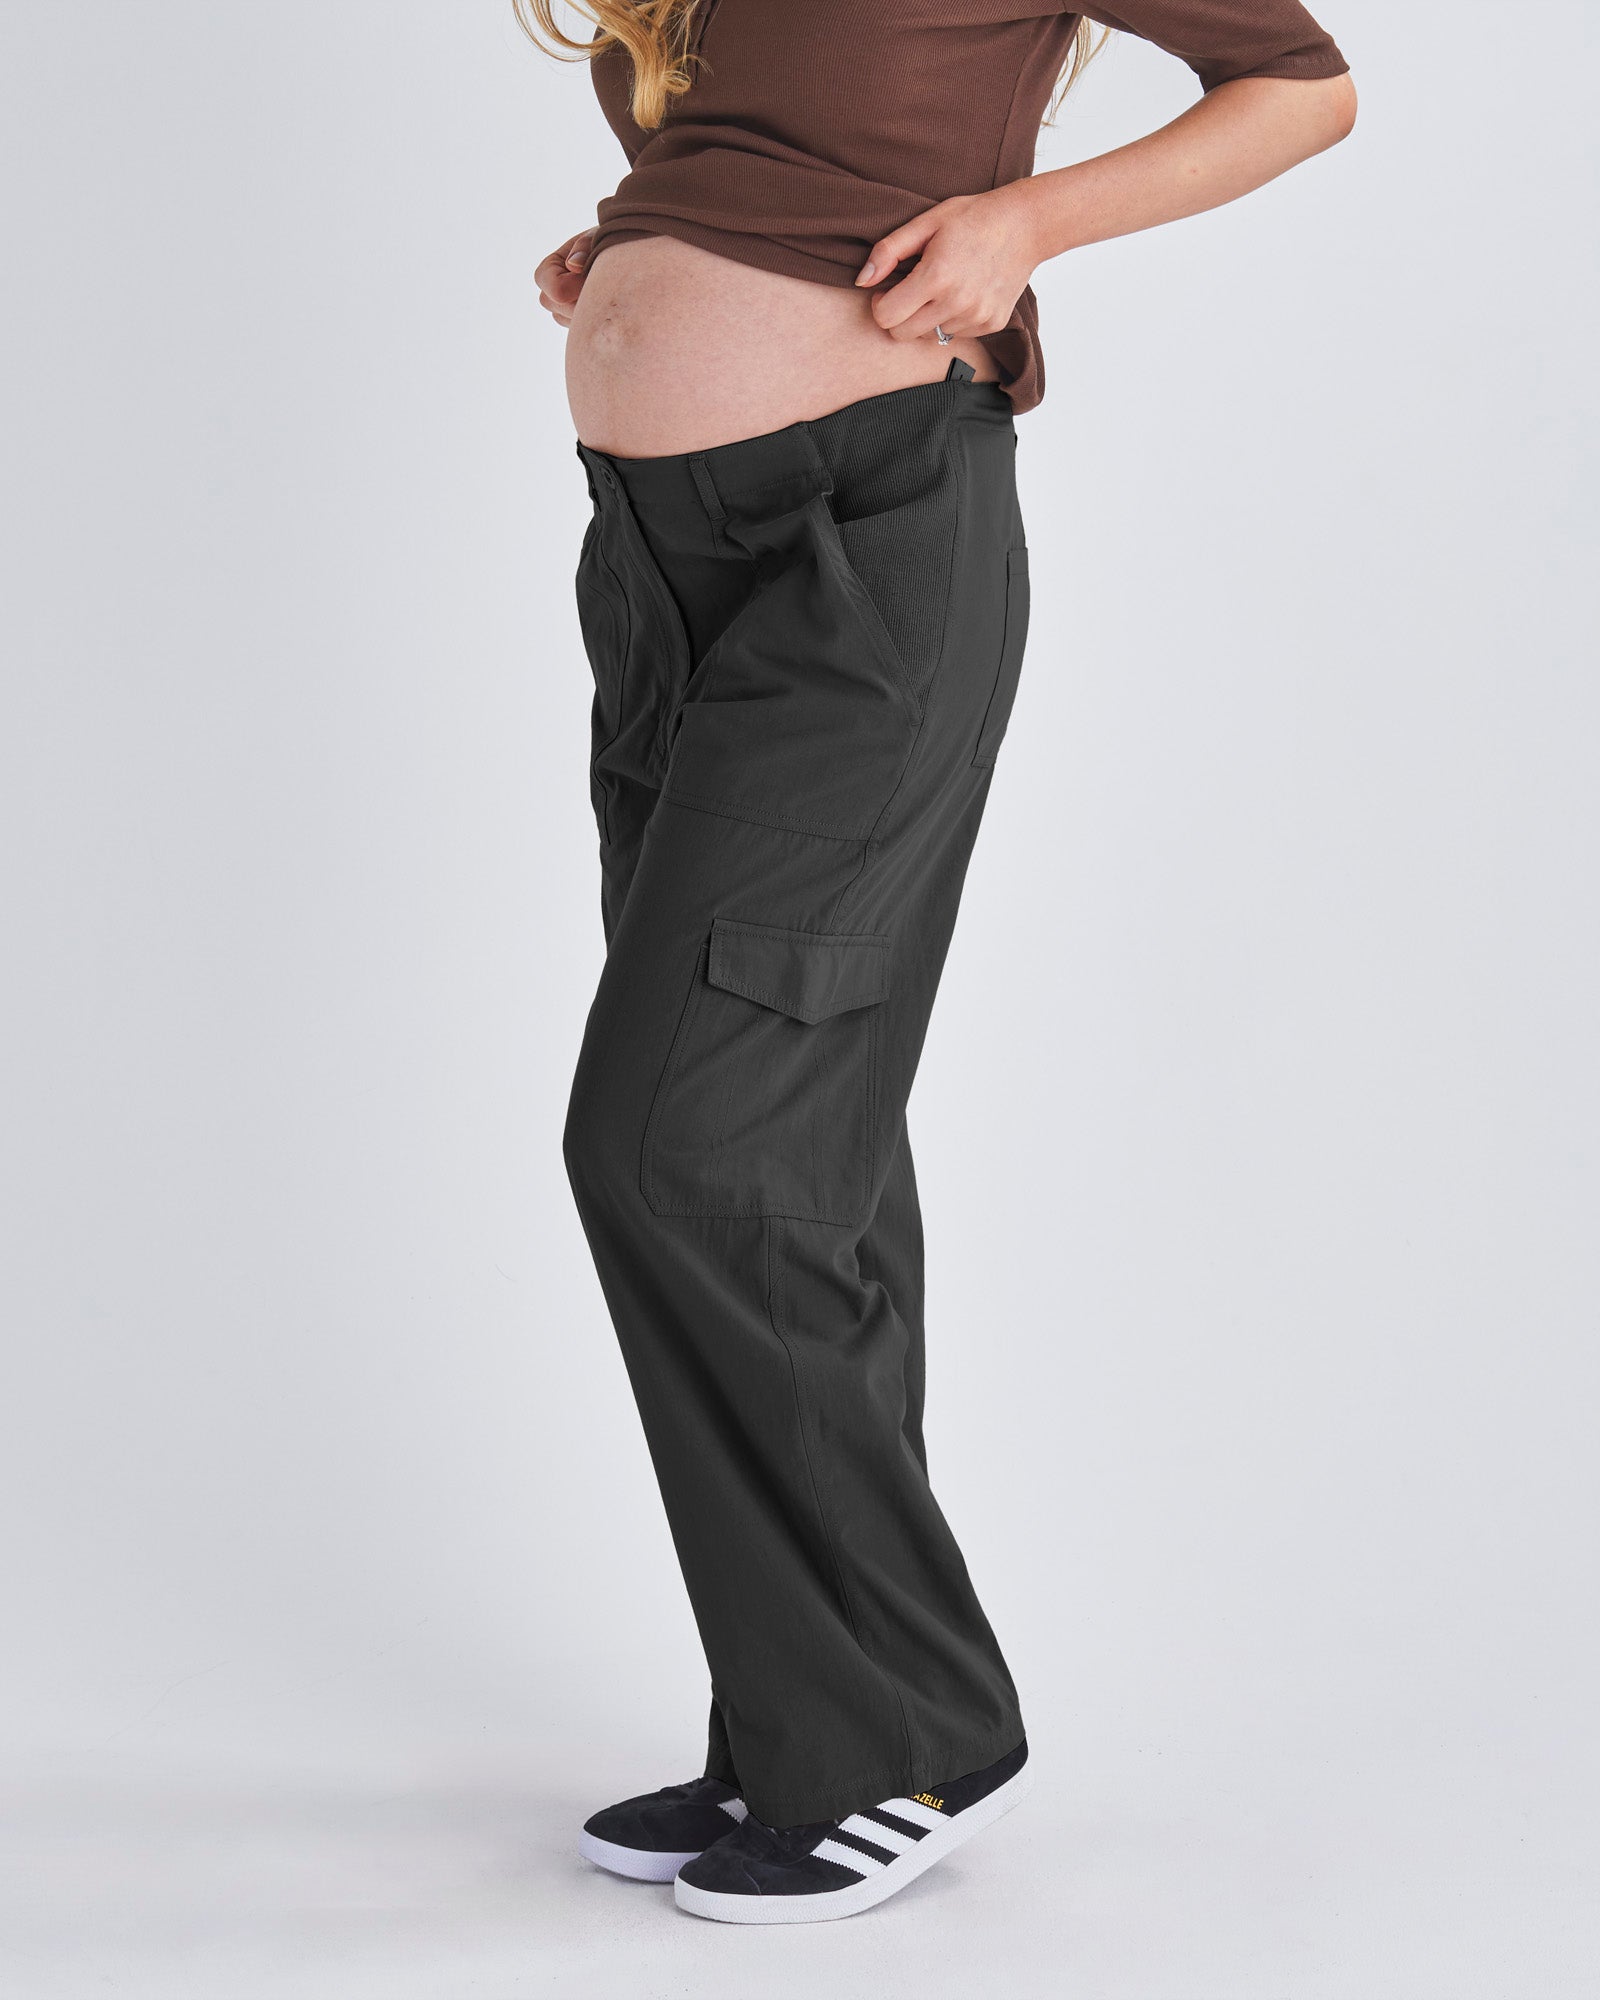 Maternity Pants Australia: Discover Comfort, Style & Support – ANGEL  MATERNITY